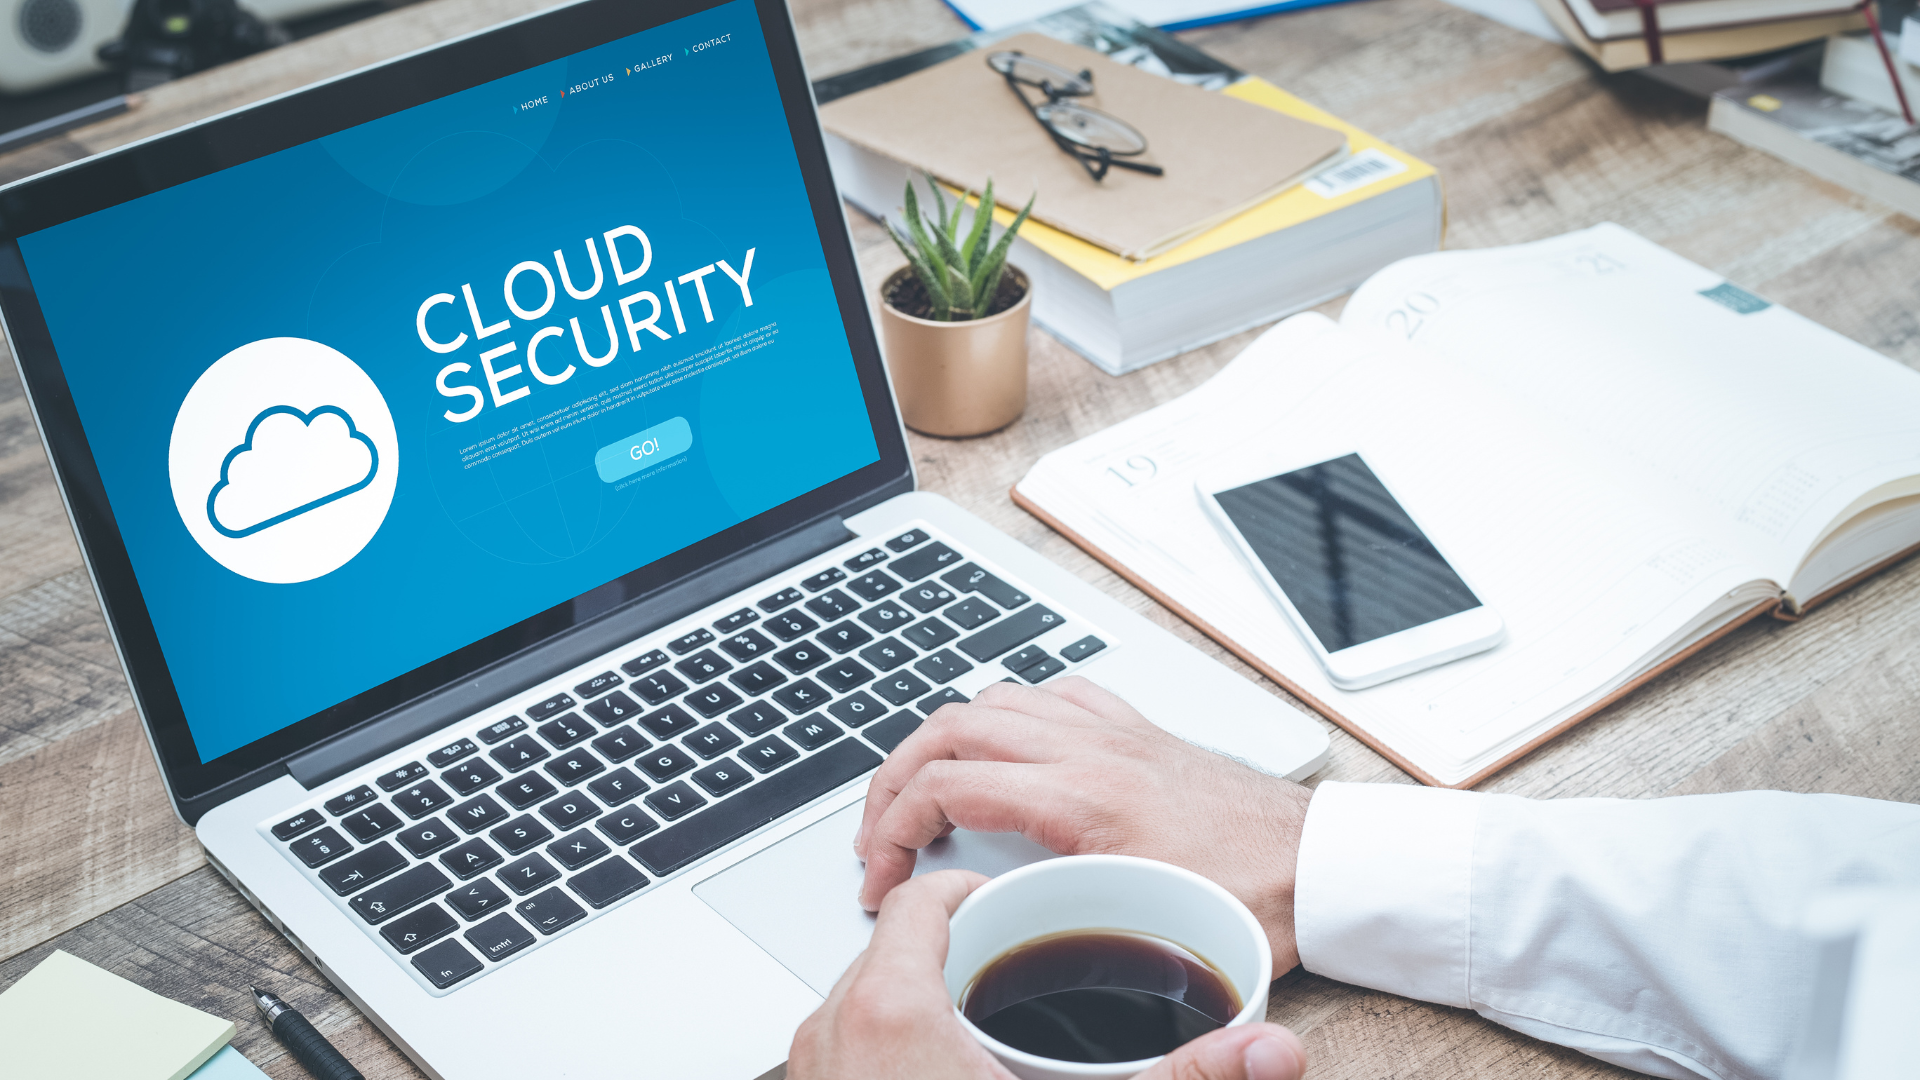 Business manager studies the meaning and benefits of cloud-based security on their computer